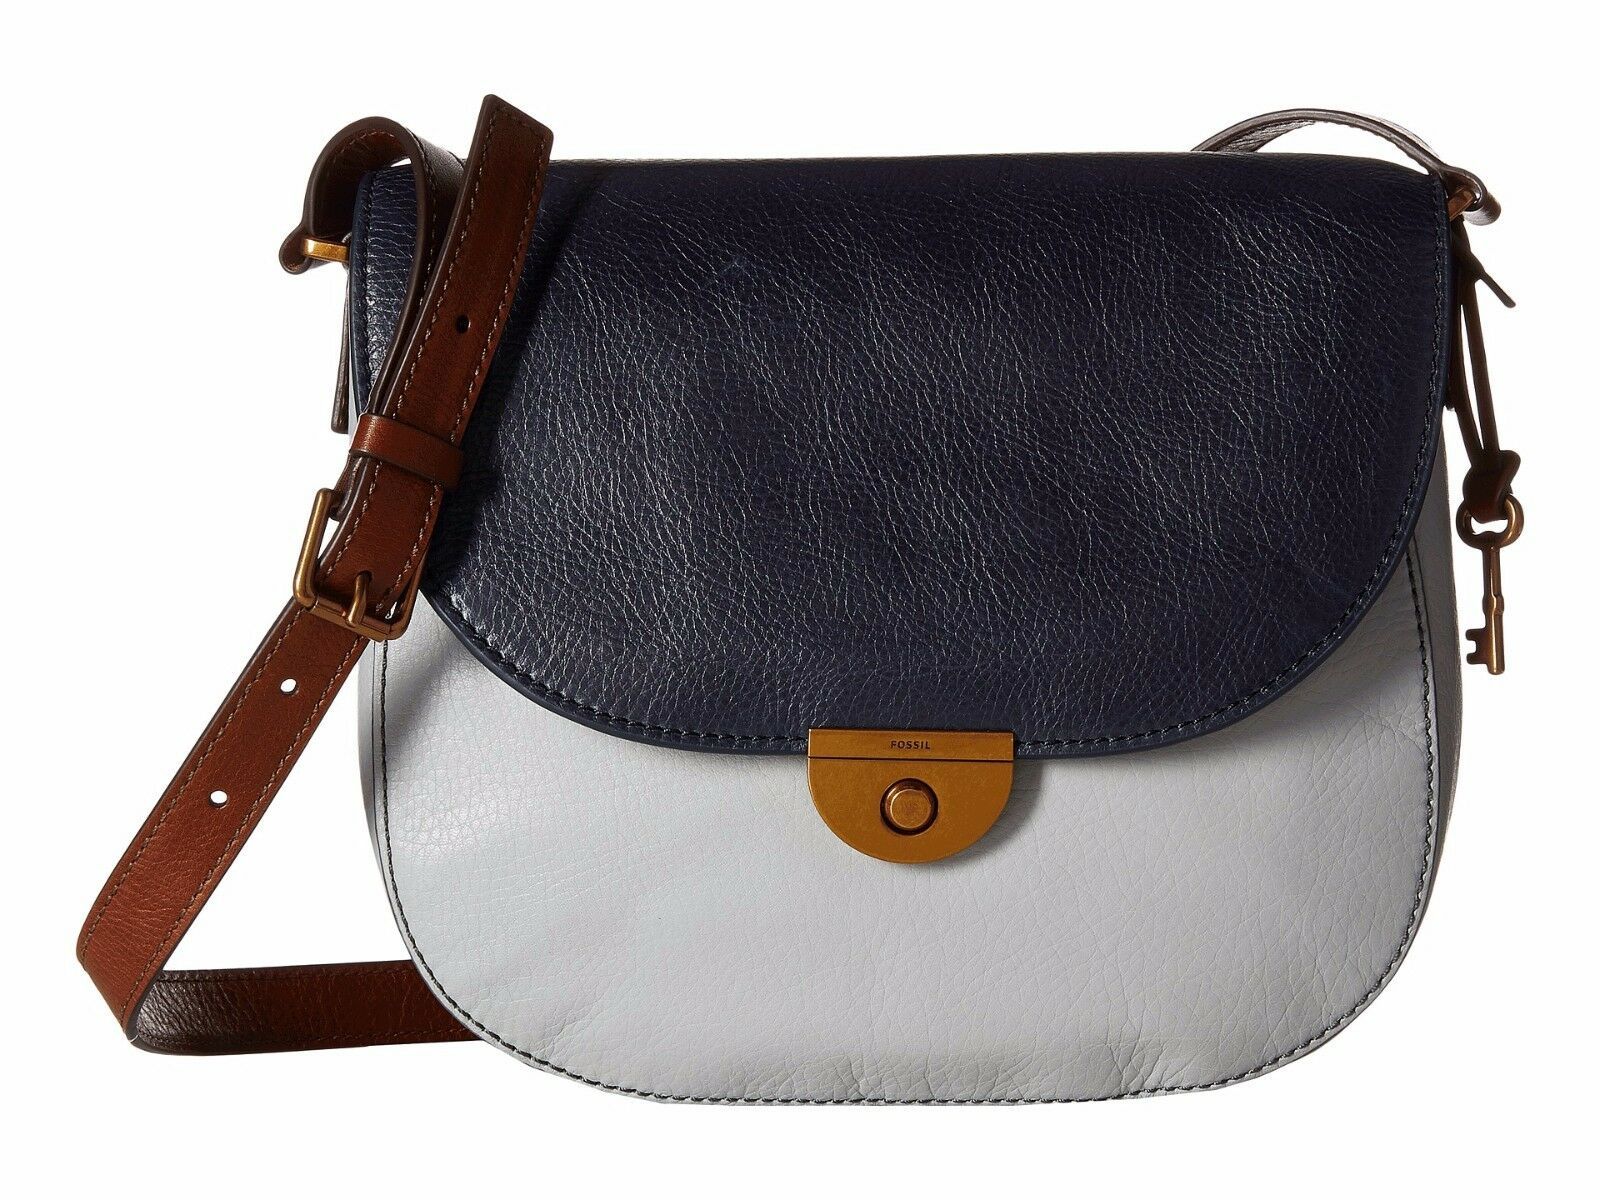 New Fossil Women's Emi Leather Saddle Bags Variety Colors